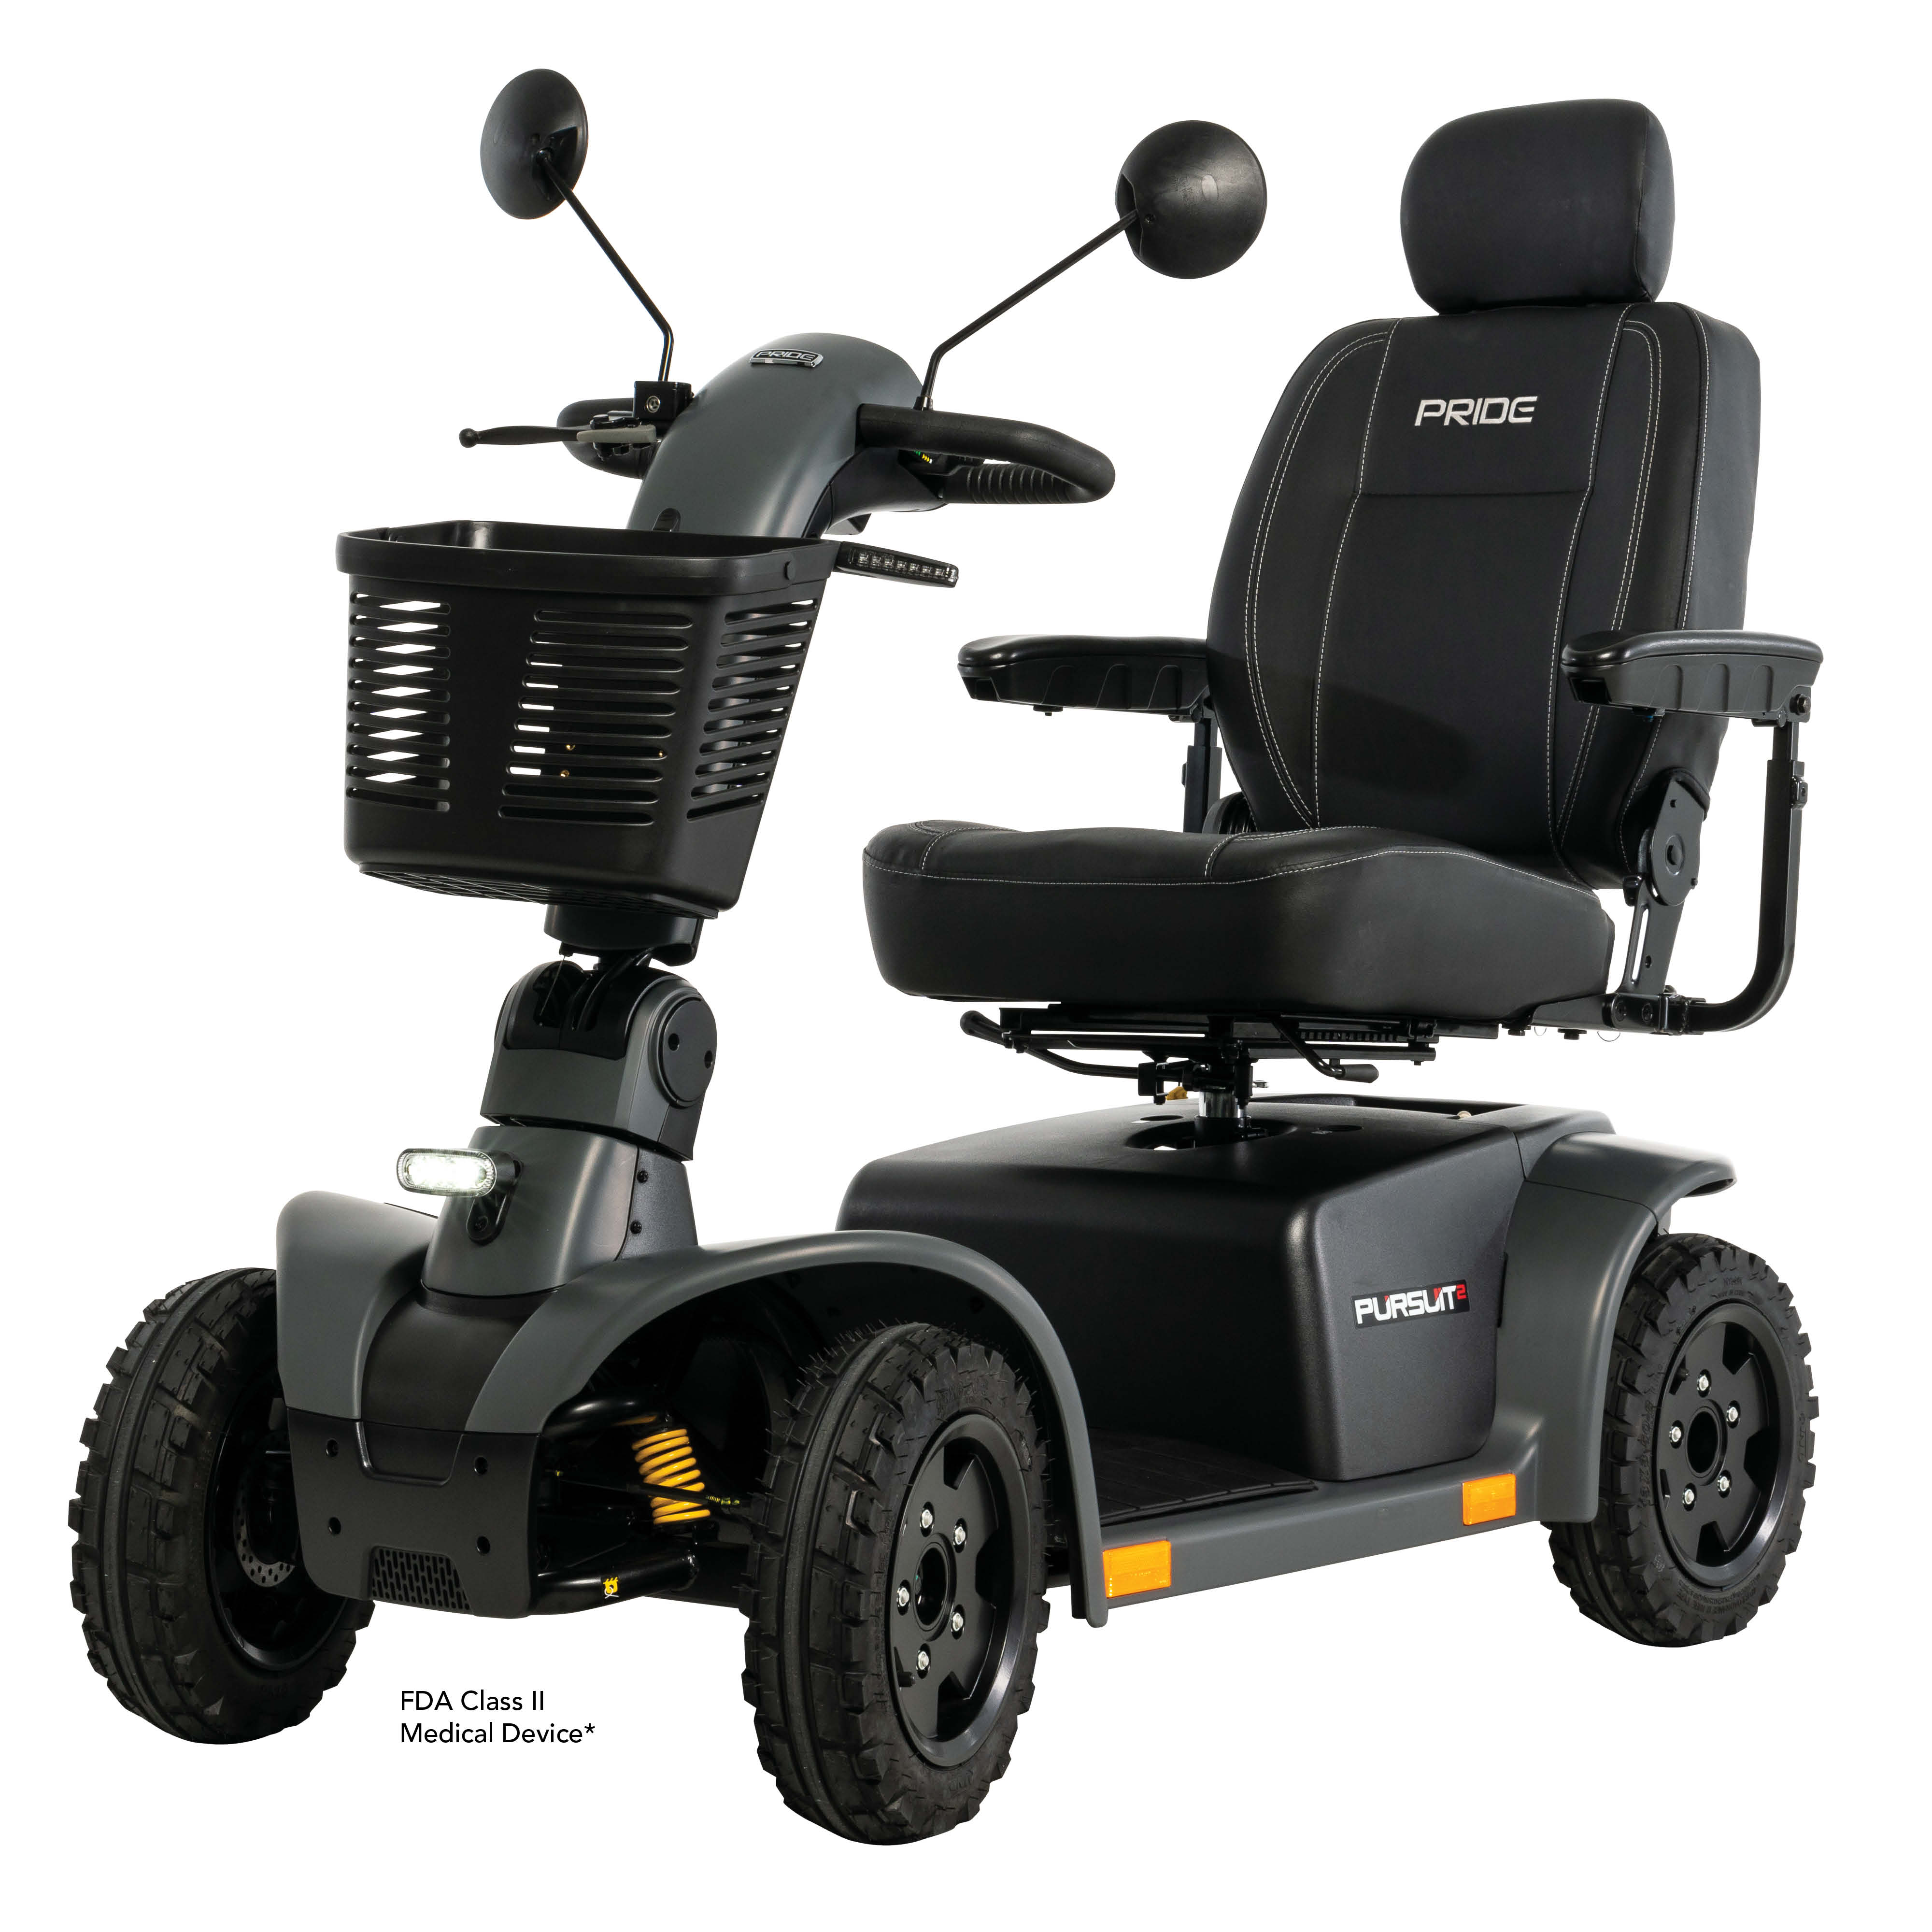 Pride Pursuit 4 Wheel PMV Electric Mobility Scooter